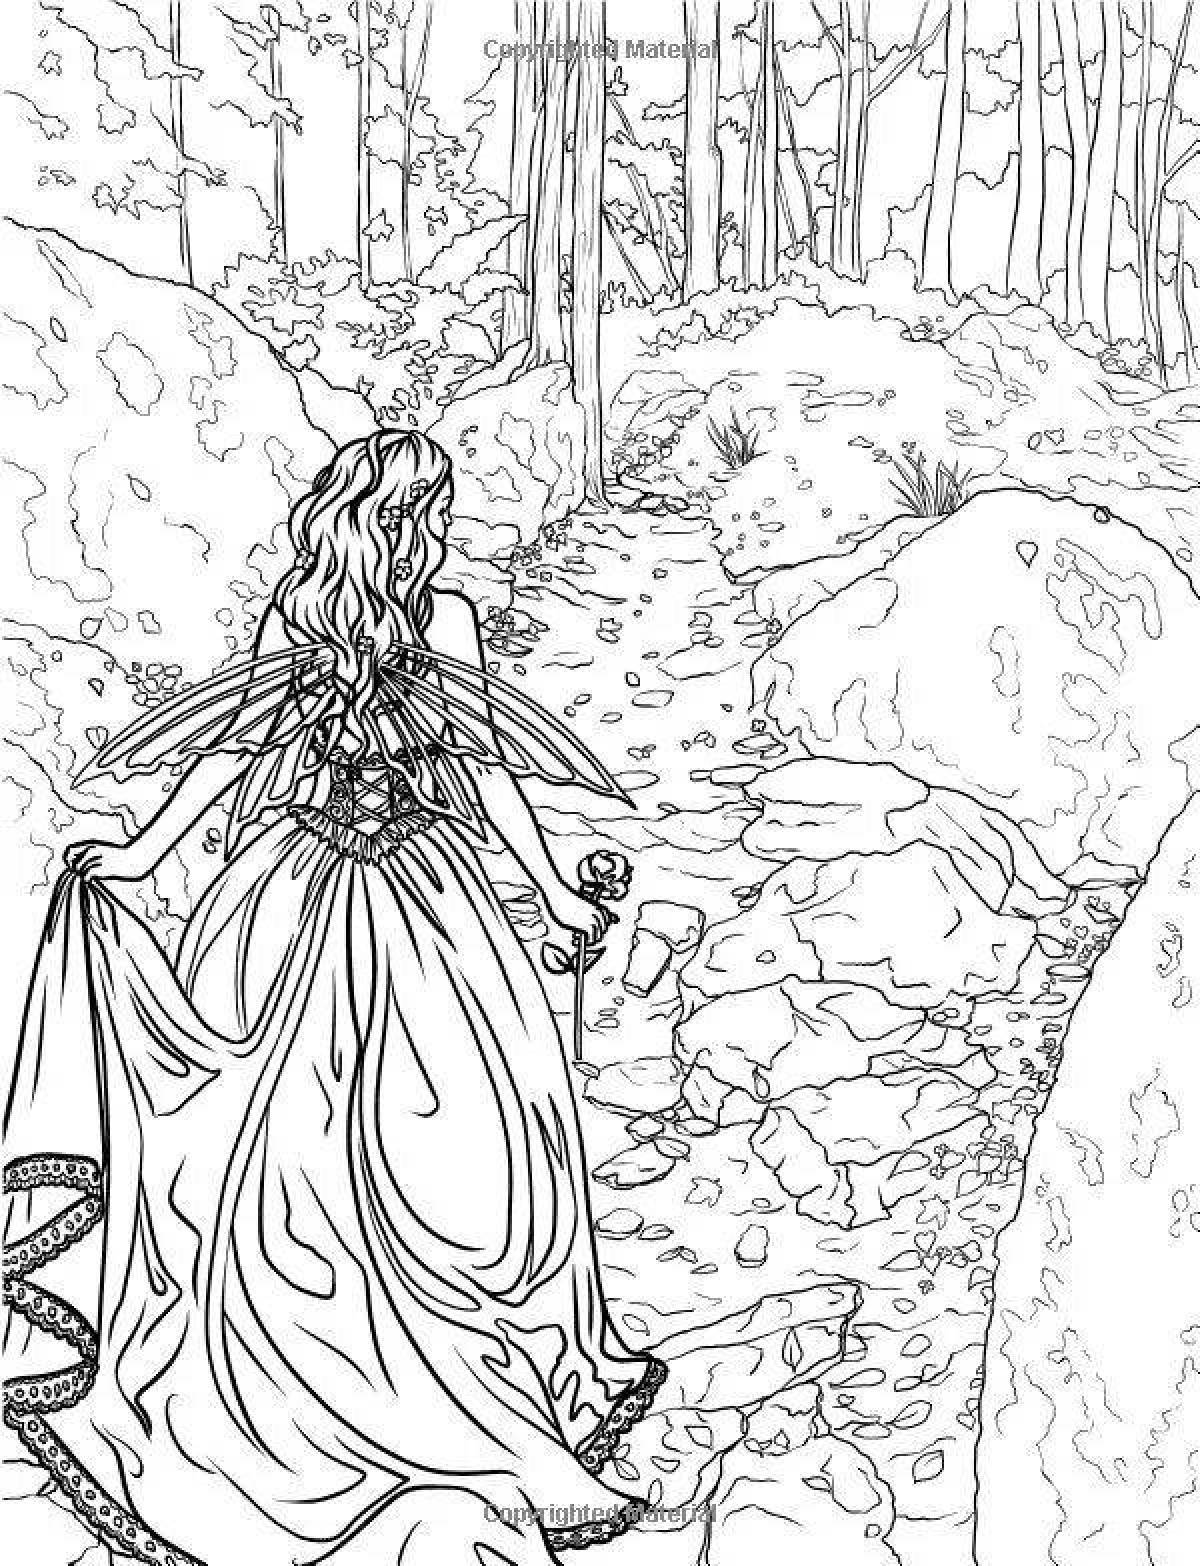 Dazzling coloring page magic